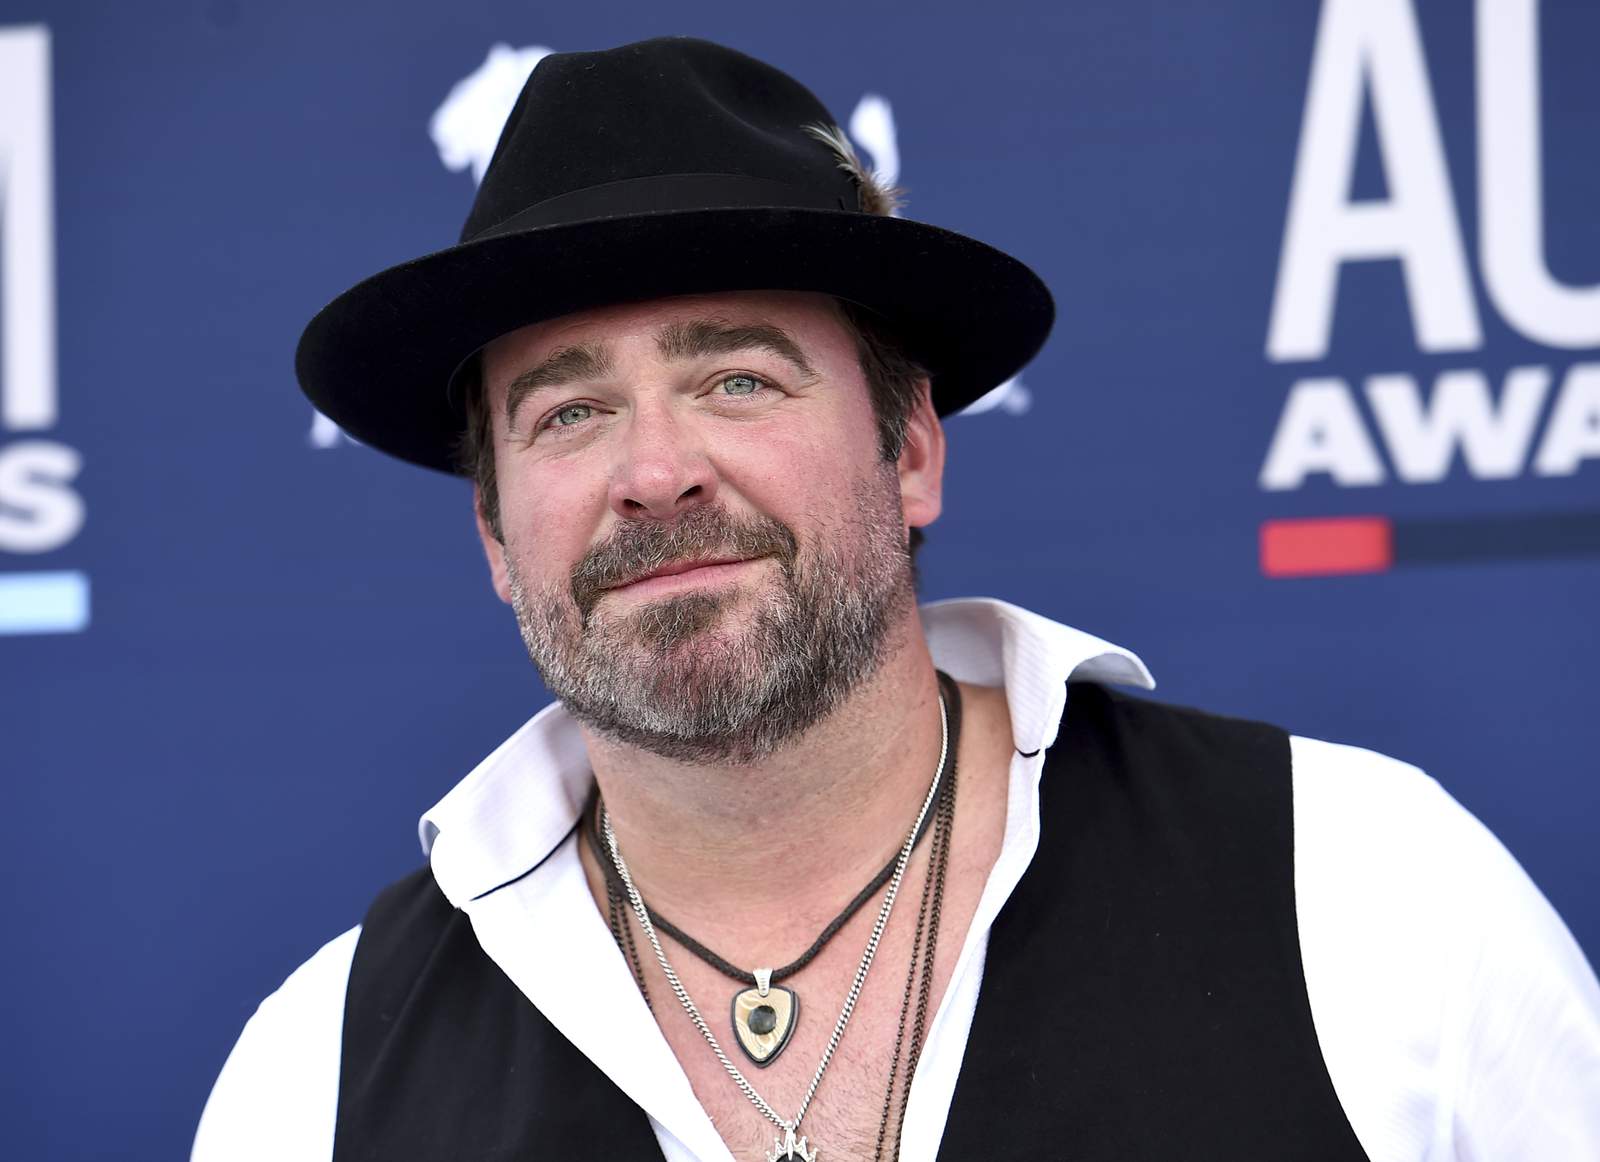 Country singer Lee Brice to miss CMA Awards due to COVID